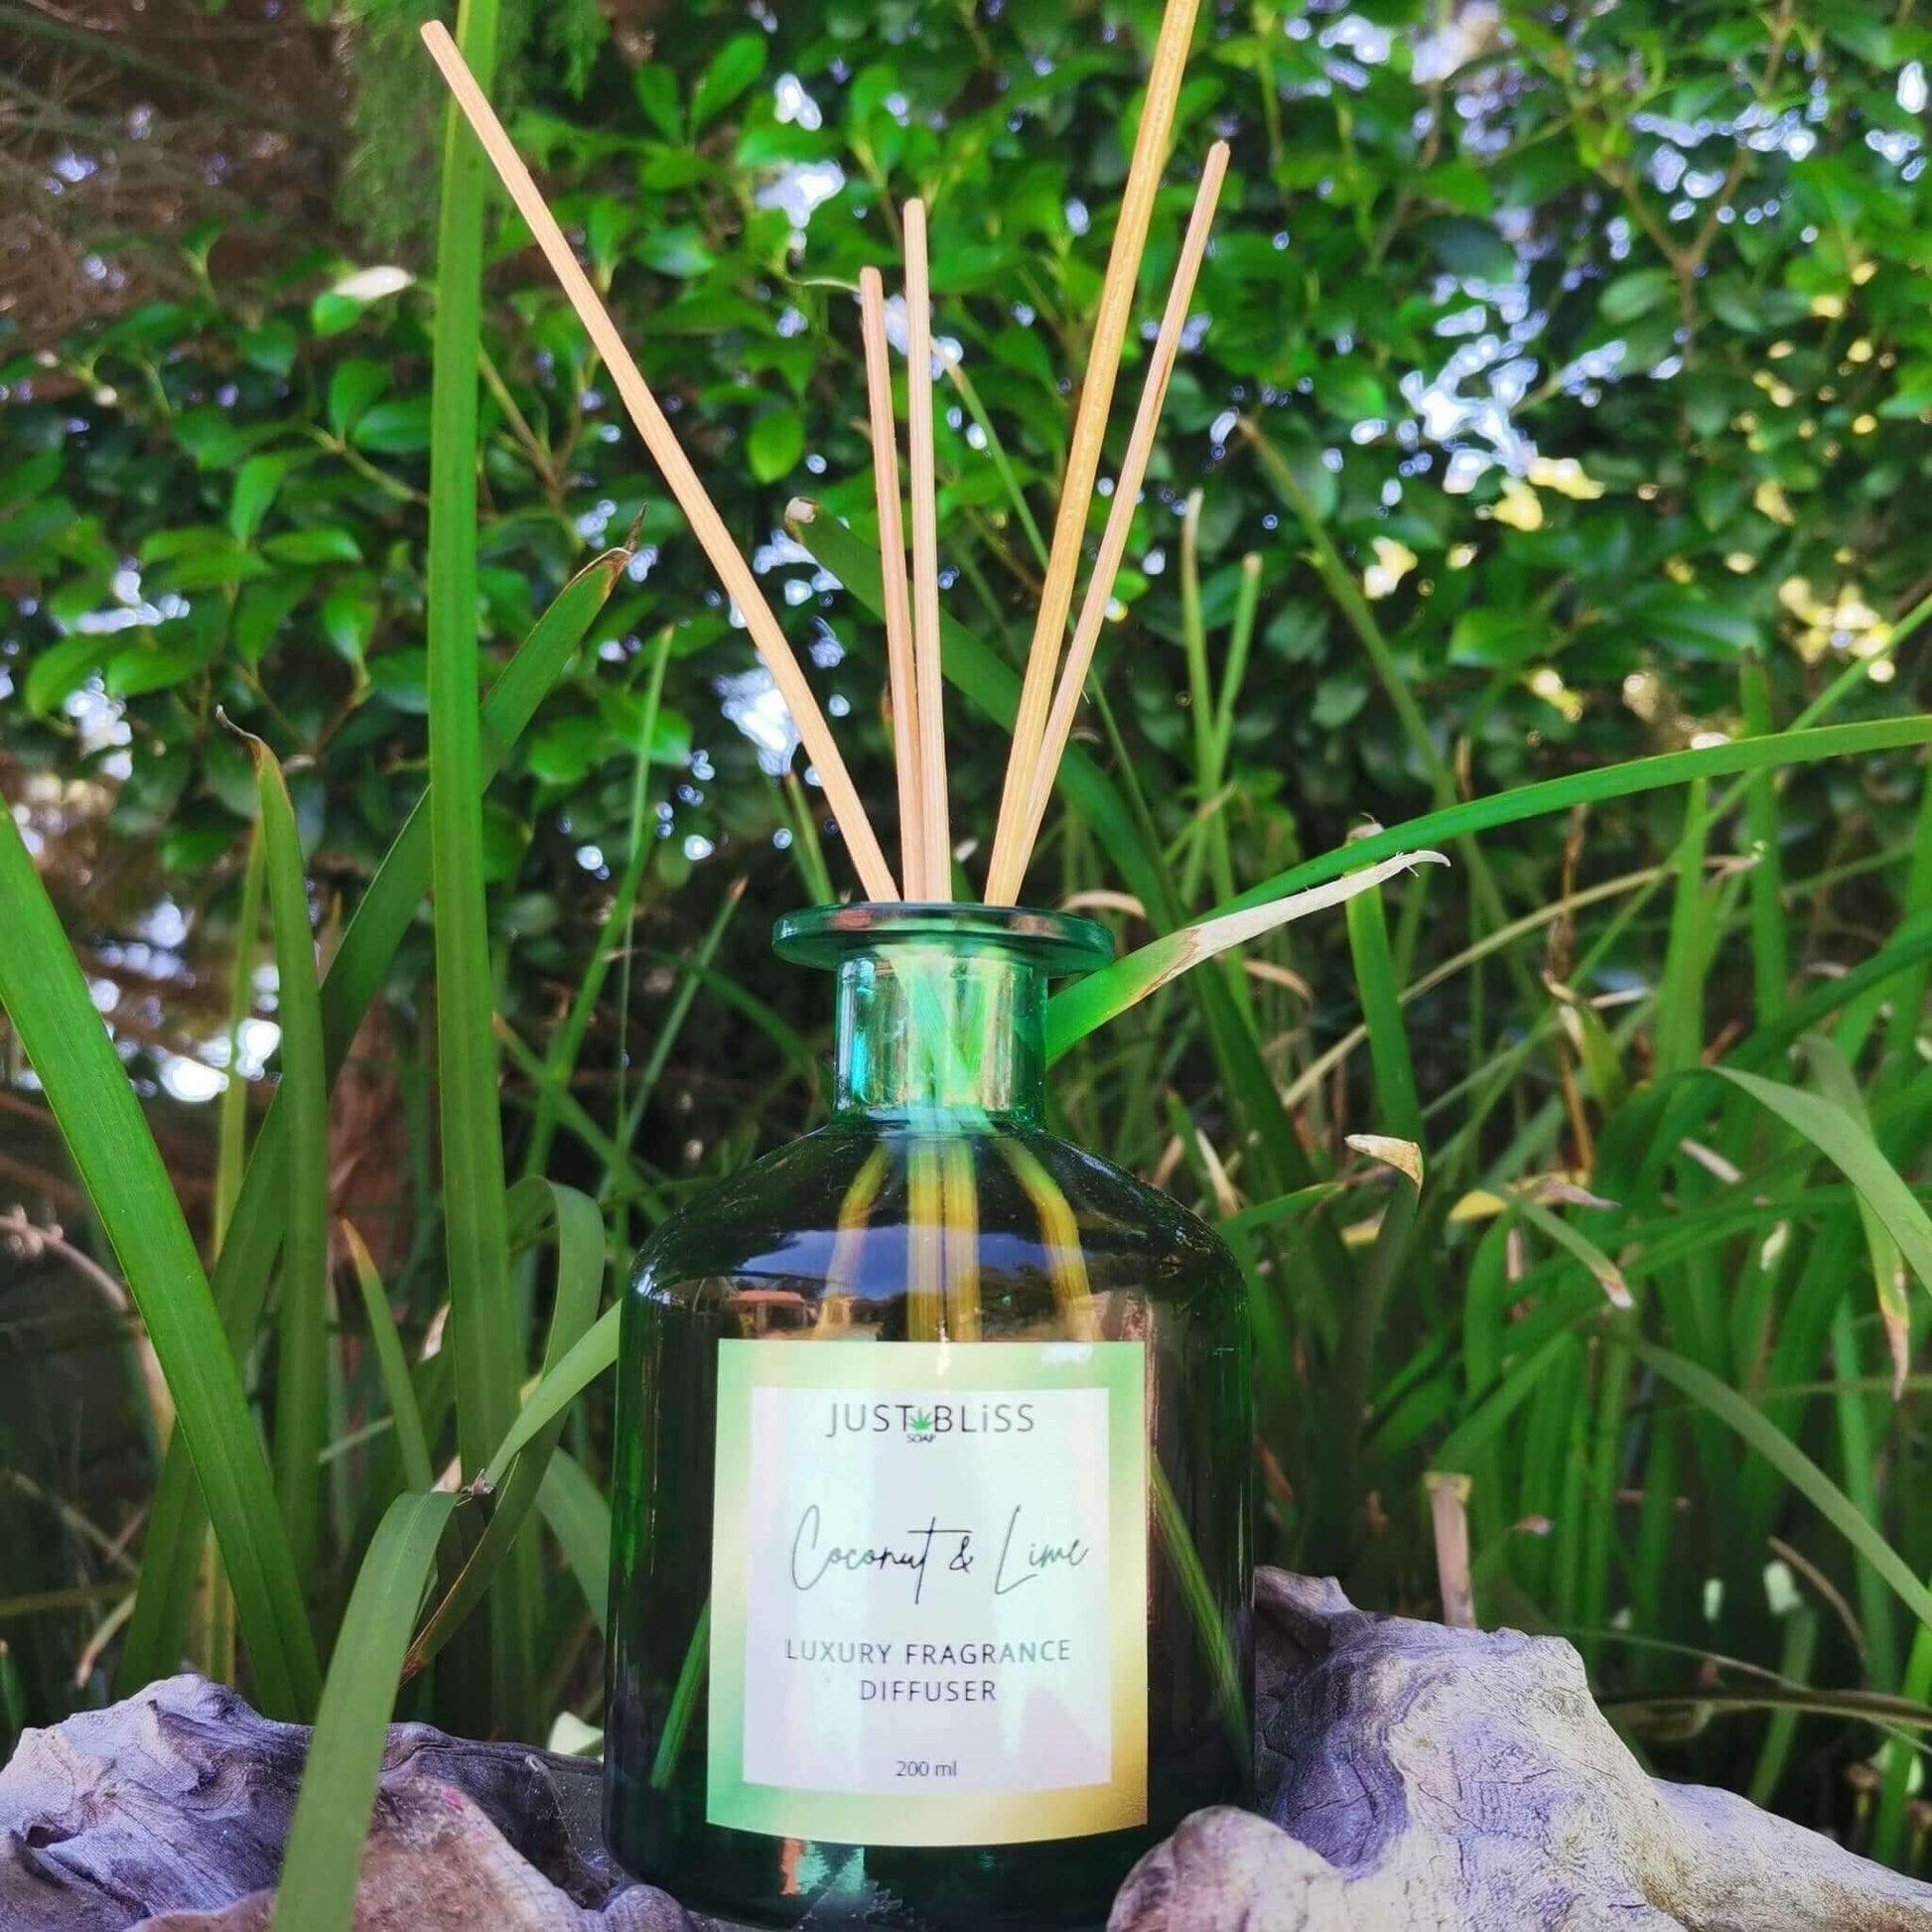 JUSTBLISS: REED DIFFUSER: coconut and lime